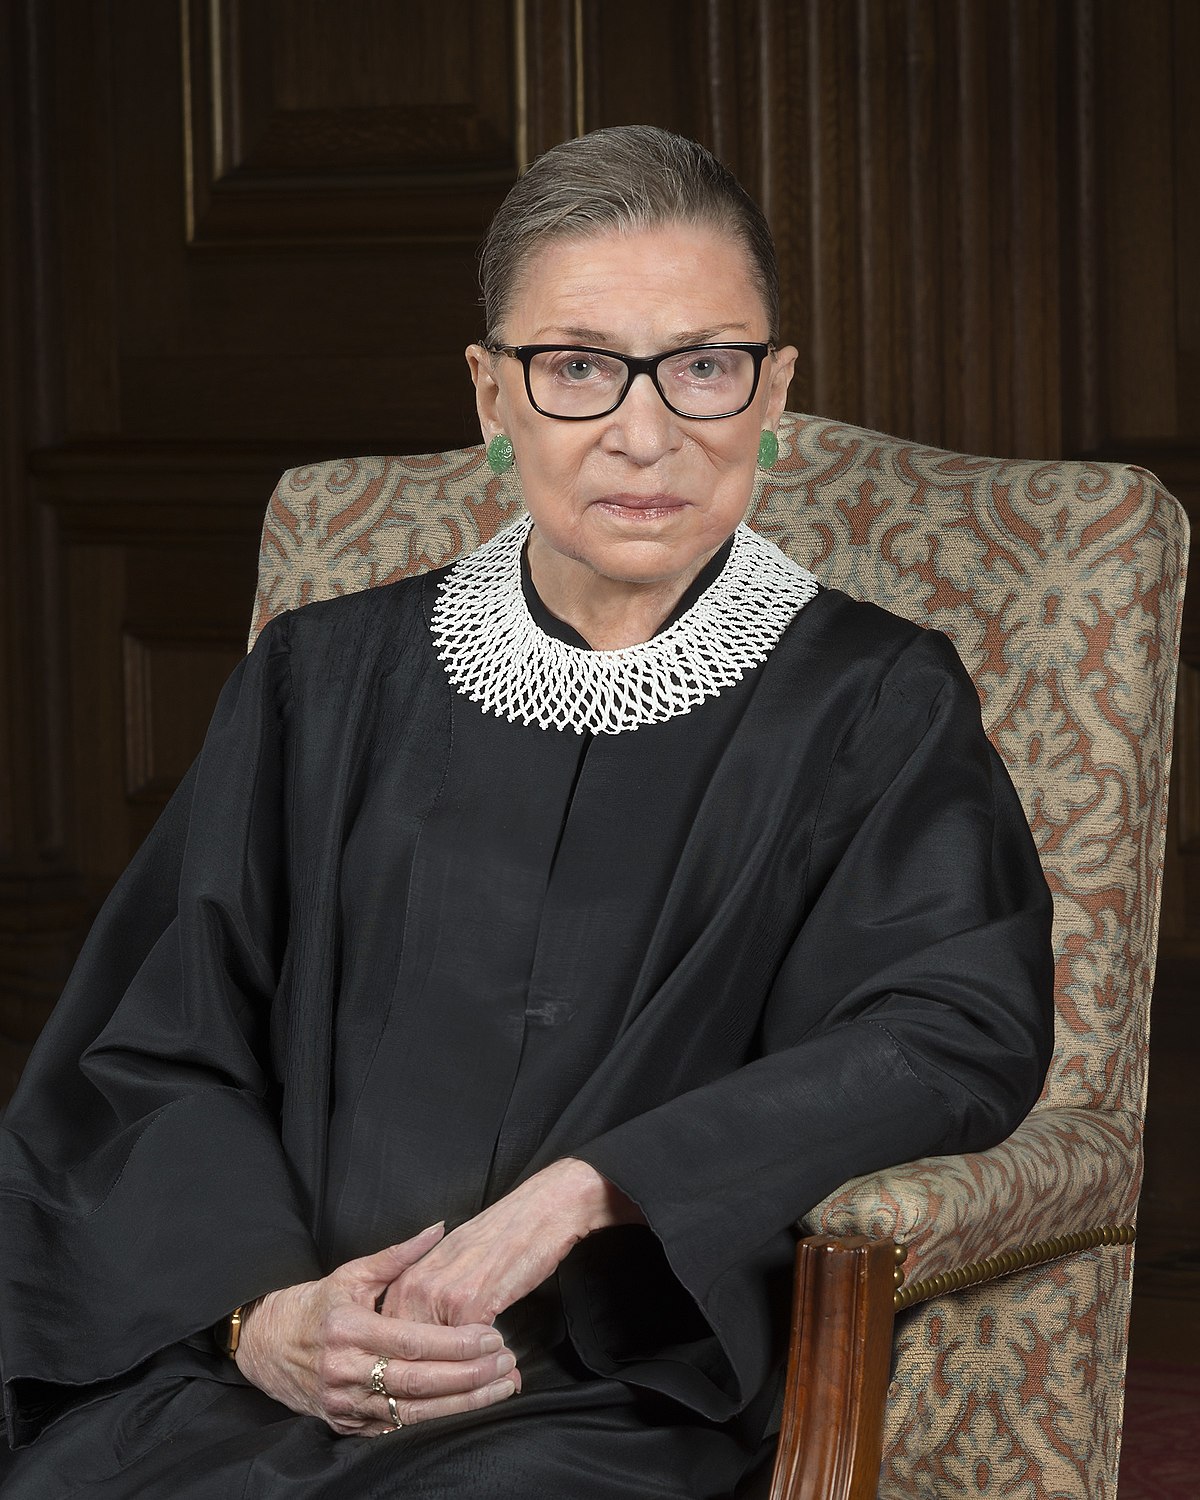 Image of Supreme Court Justice Ruth Bader Ginsburg, wearing her black robe and infamous white collar.